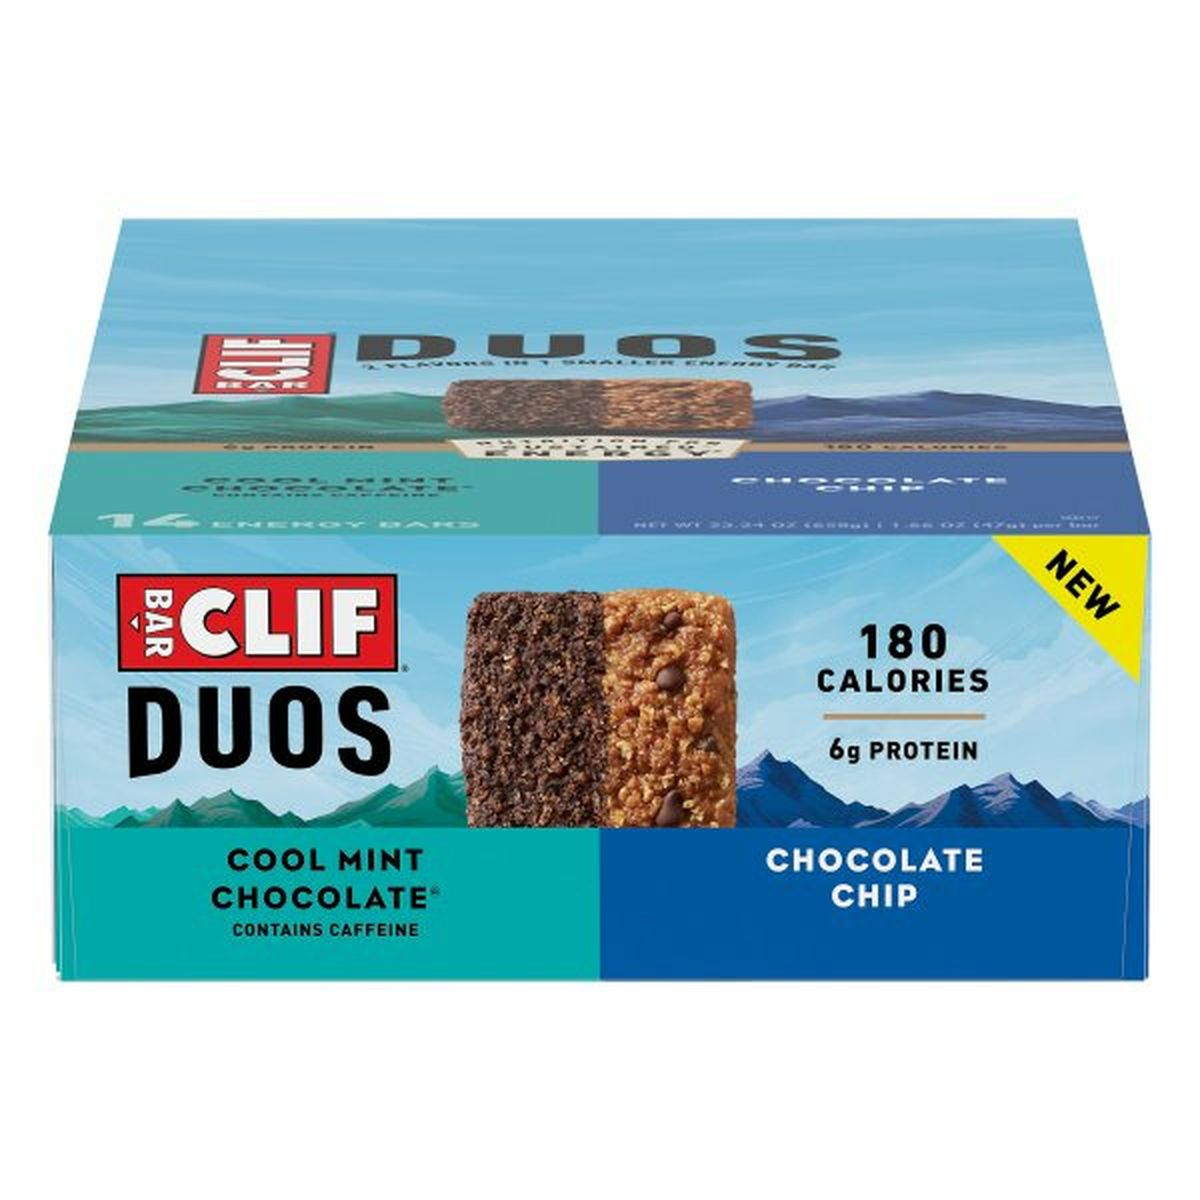 Calories in CLIF BAR Duos Energy Bars, Cool Mint Chocolate/Chocolate Chip, 14 Pack